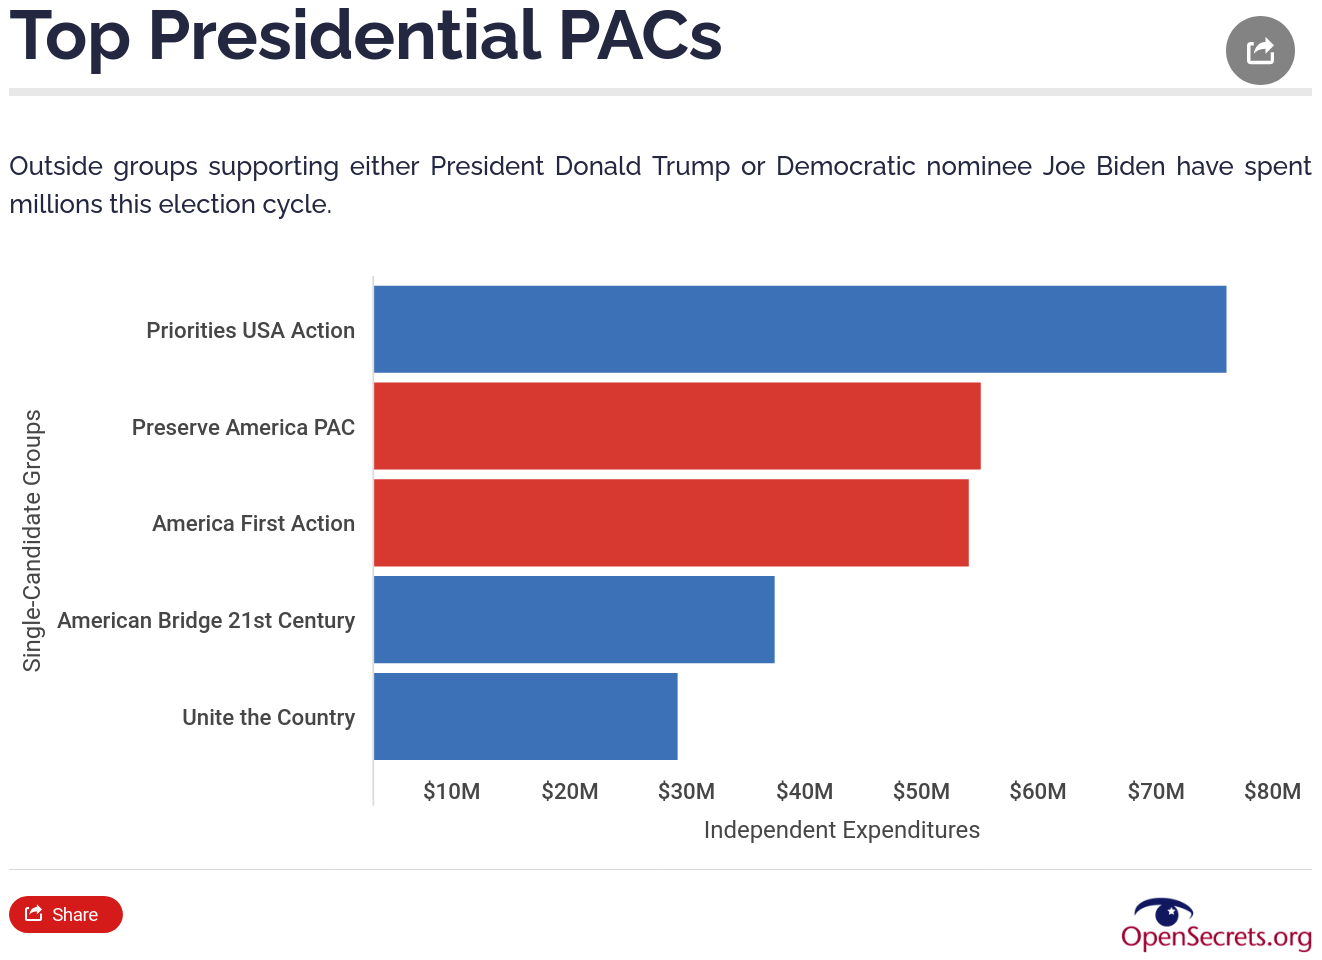 2020_US_election-top_presidential_PACs-screenshot-2020-09-22.png